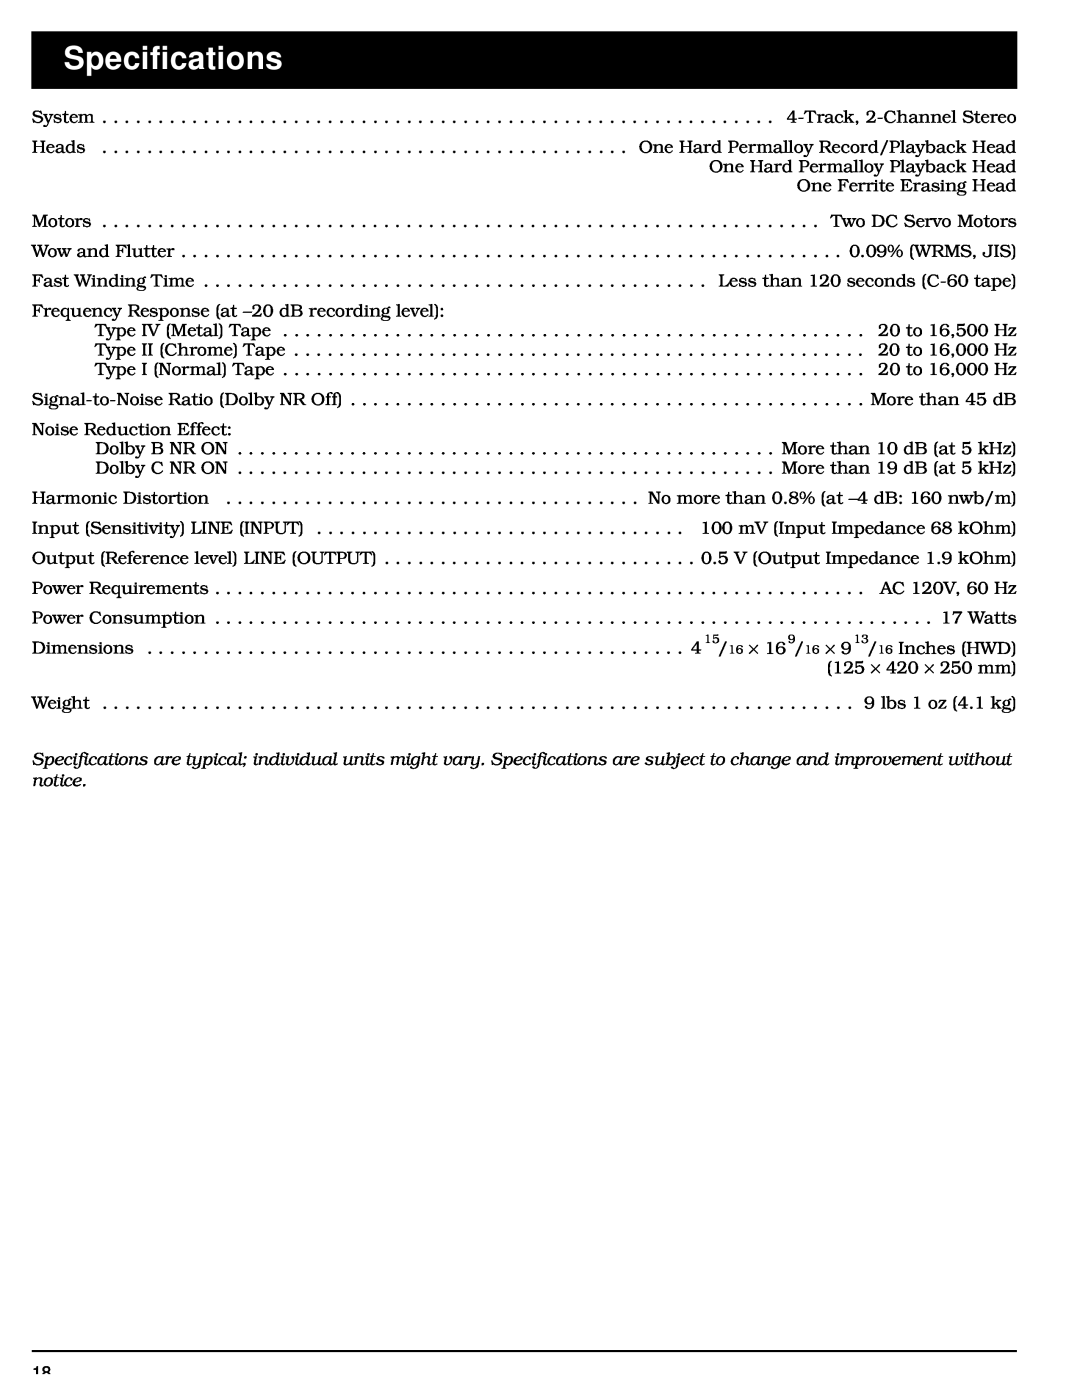 Optimus SCT-56 owner manual Specifications 